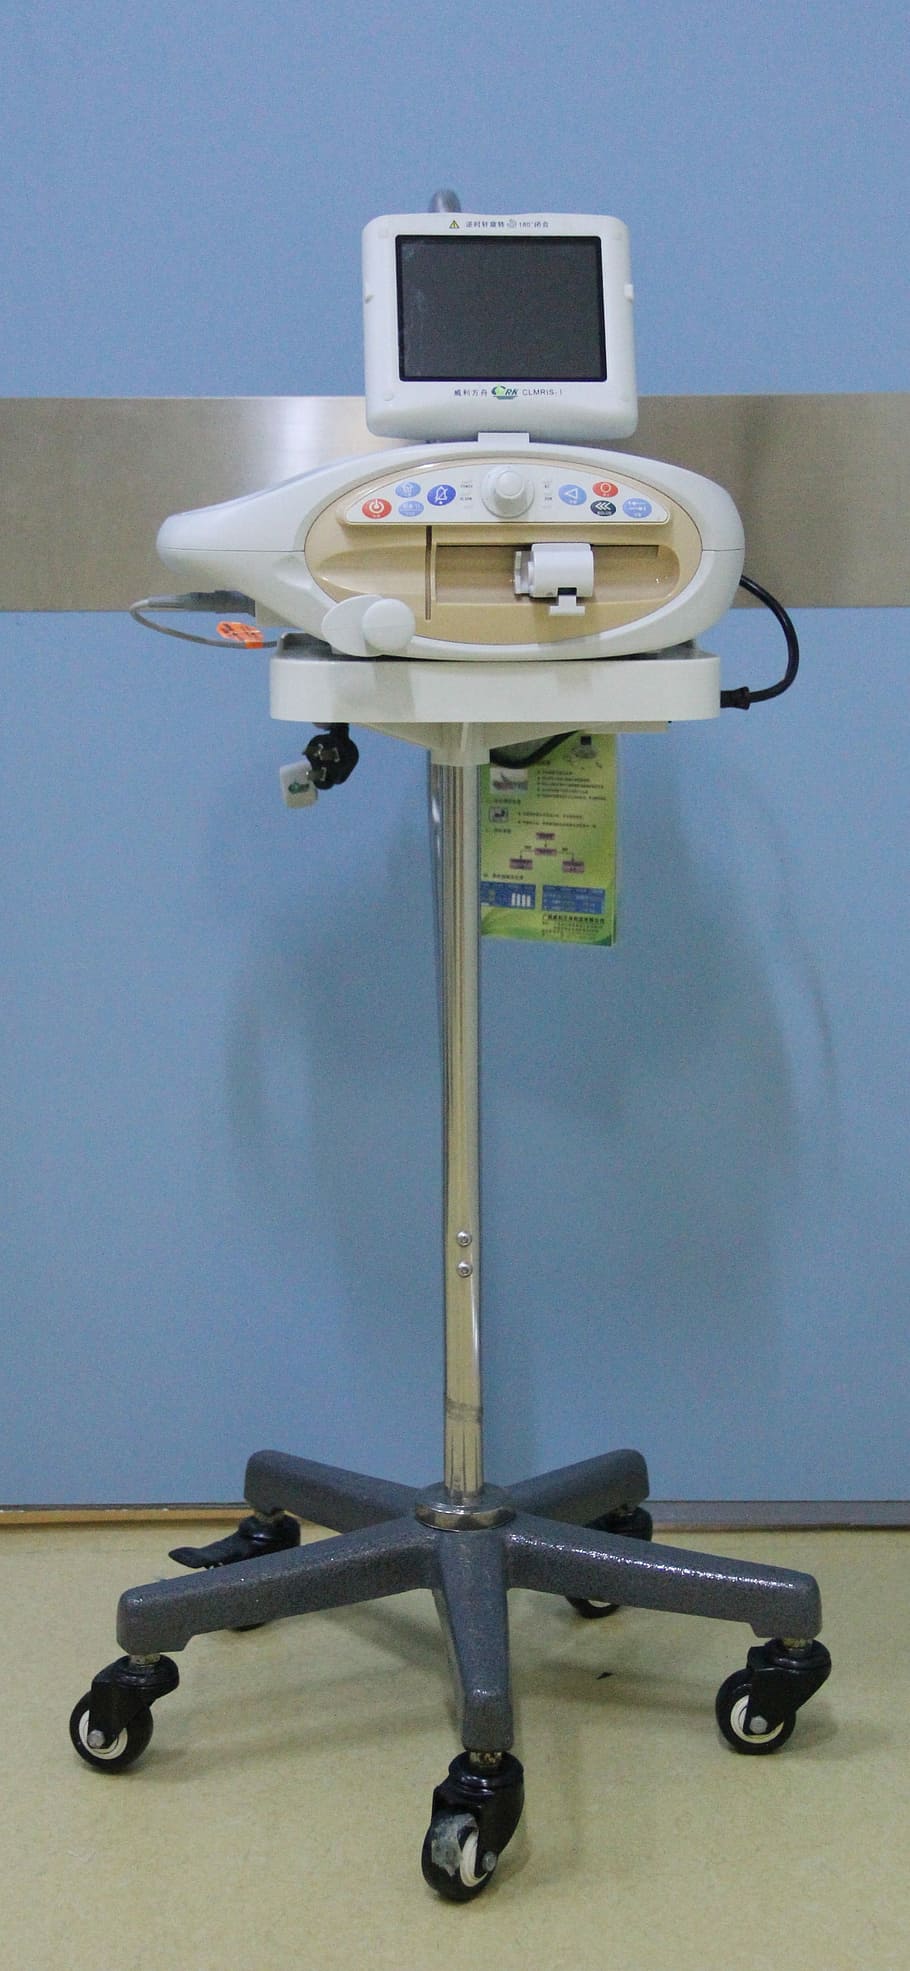 Anesthesia Machine, Surgery, Instrument, hospital, equipment, health, treatment, technology, indoors, computer